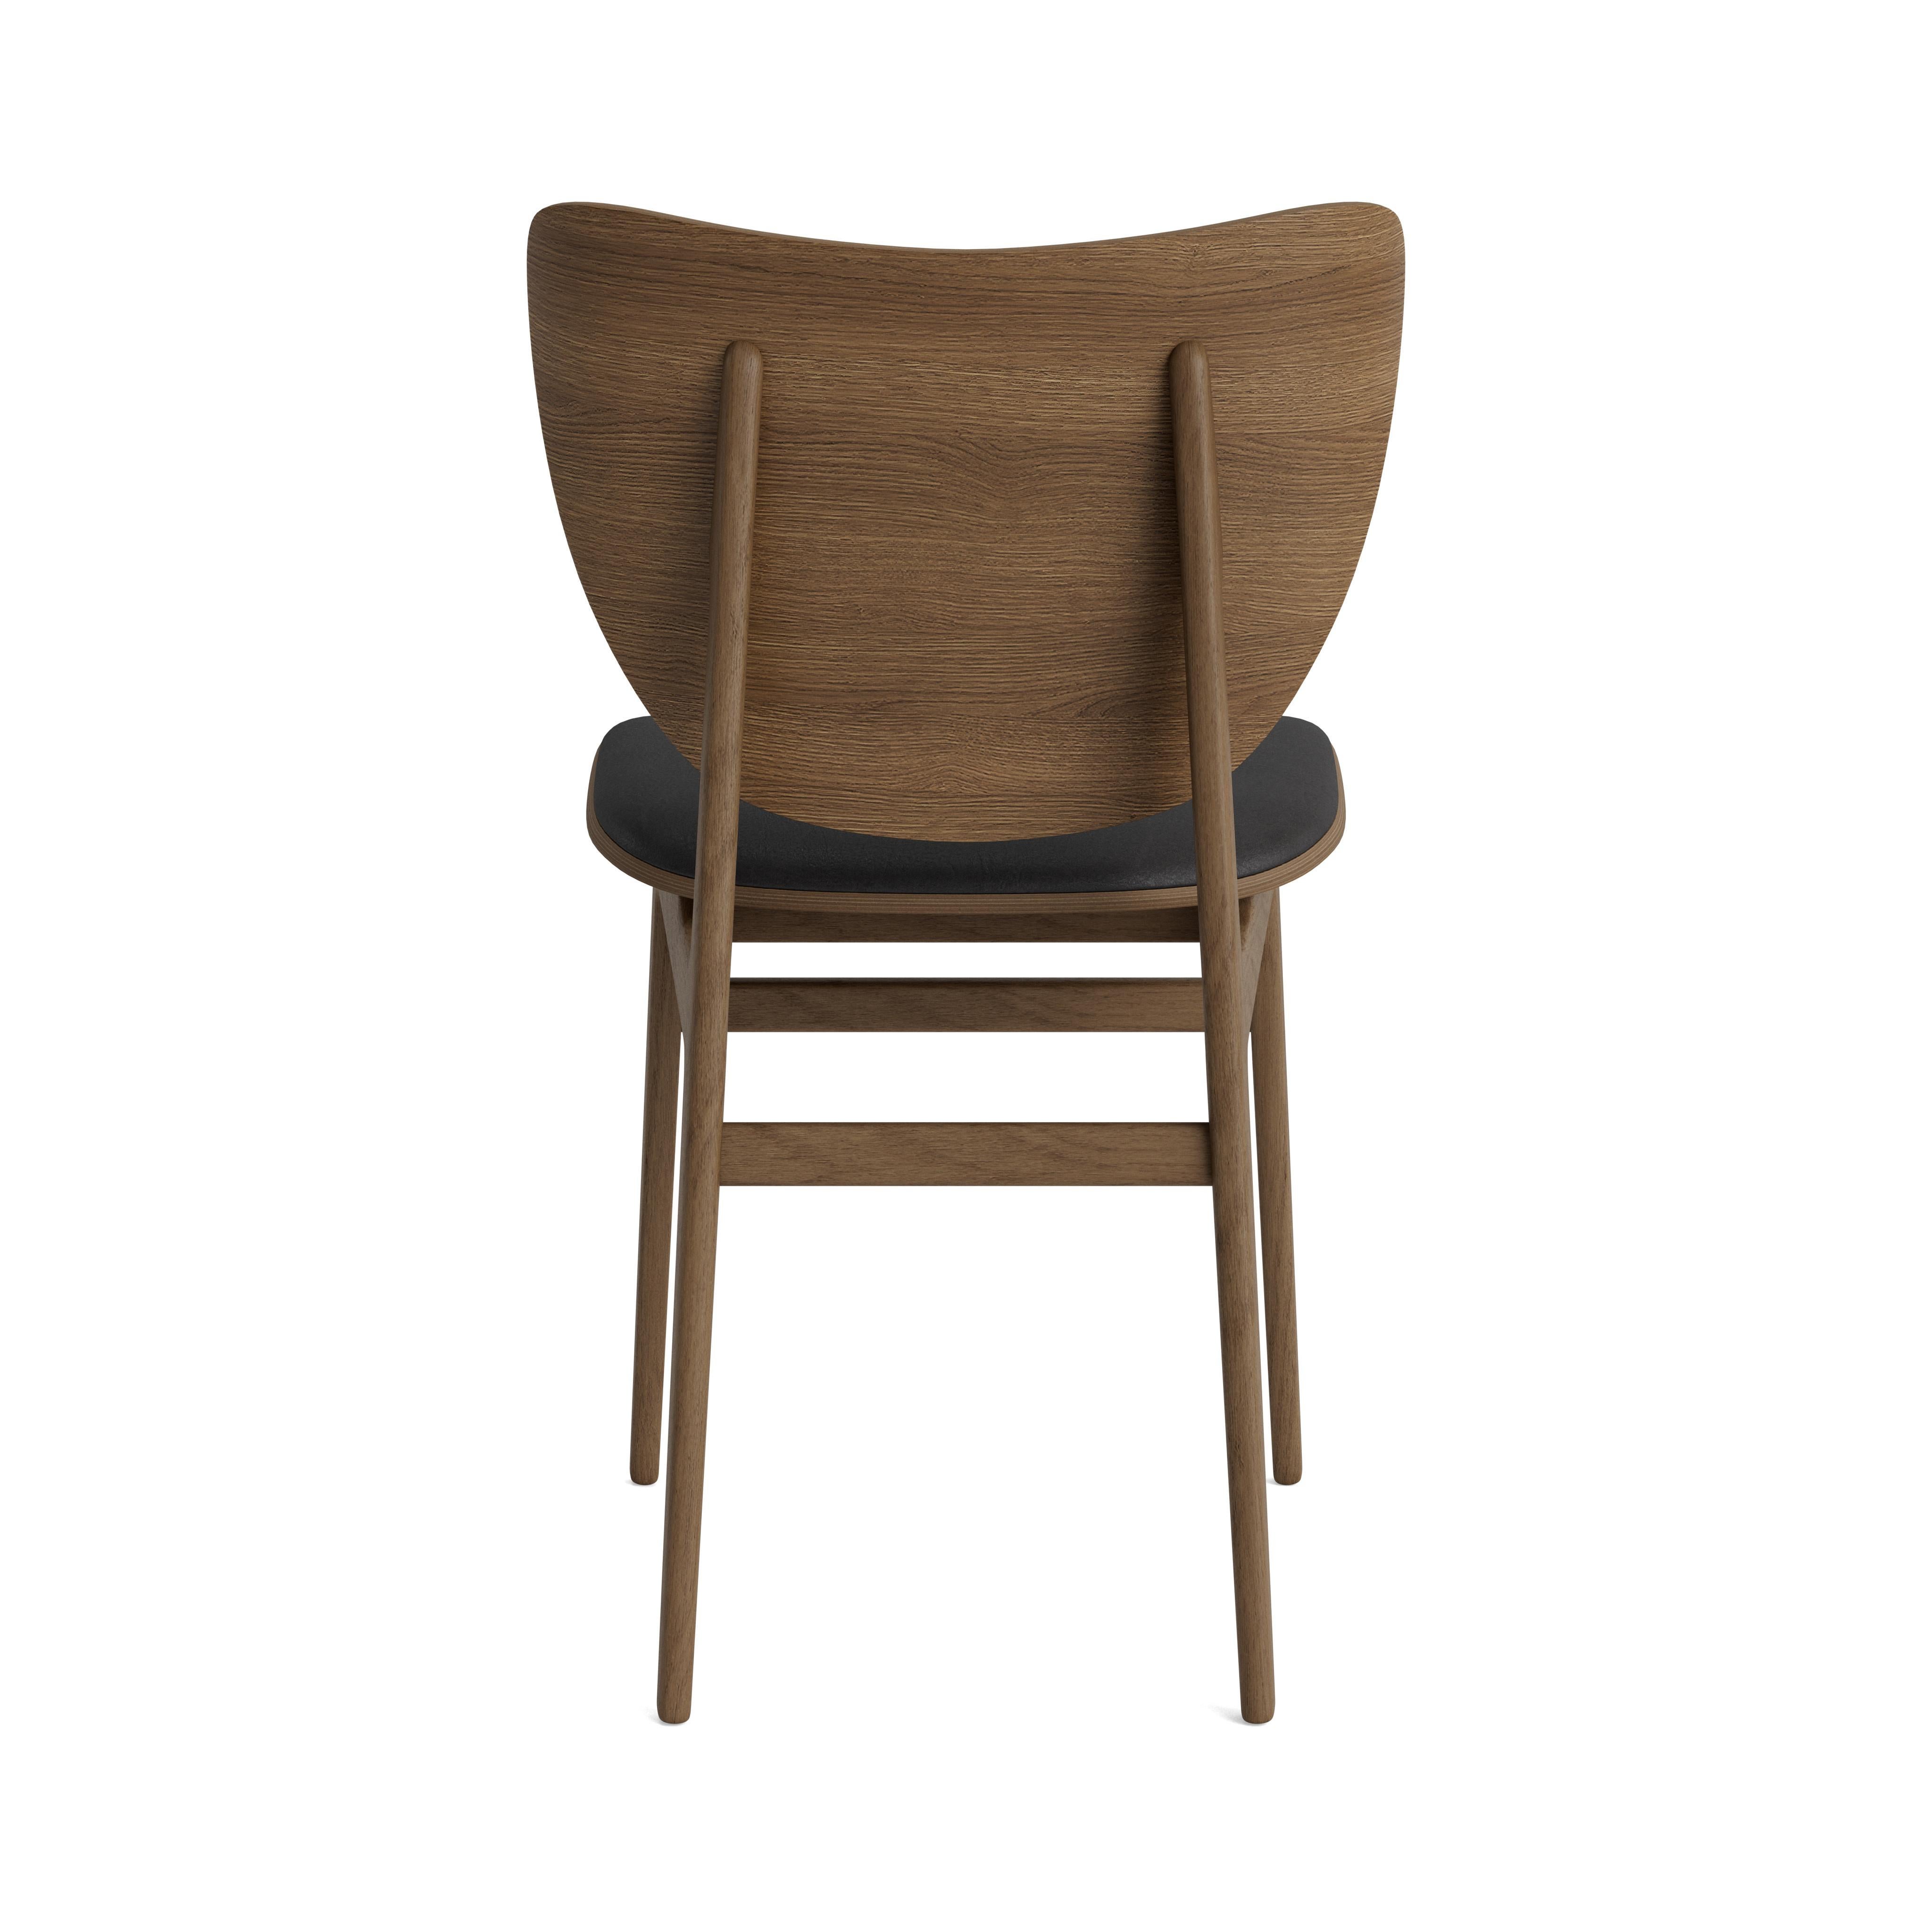 Elephant Dining Chair by NORR11
Dimensions: D 51 x W 47 x H 80,5 cm. SH 45,5 cm.
Materials: Dark smoked oak and upholstery.
Upholstery: Dunes Anthrazite 21003. 

Available in different oak finishes: Natural oak, light smoked oak, dark smoked oak,